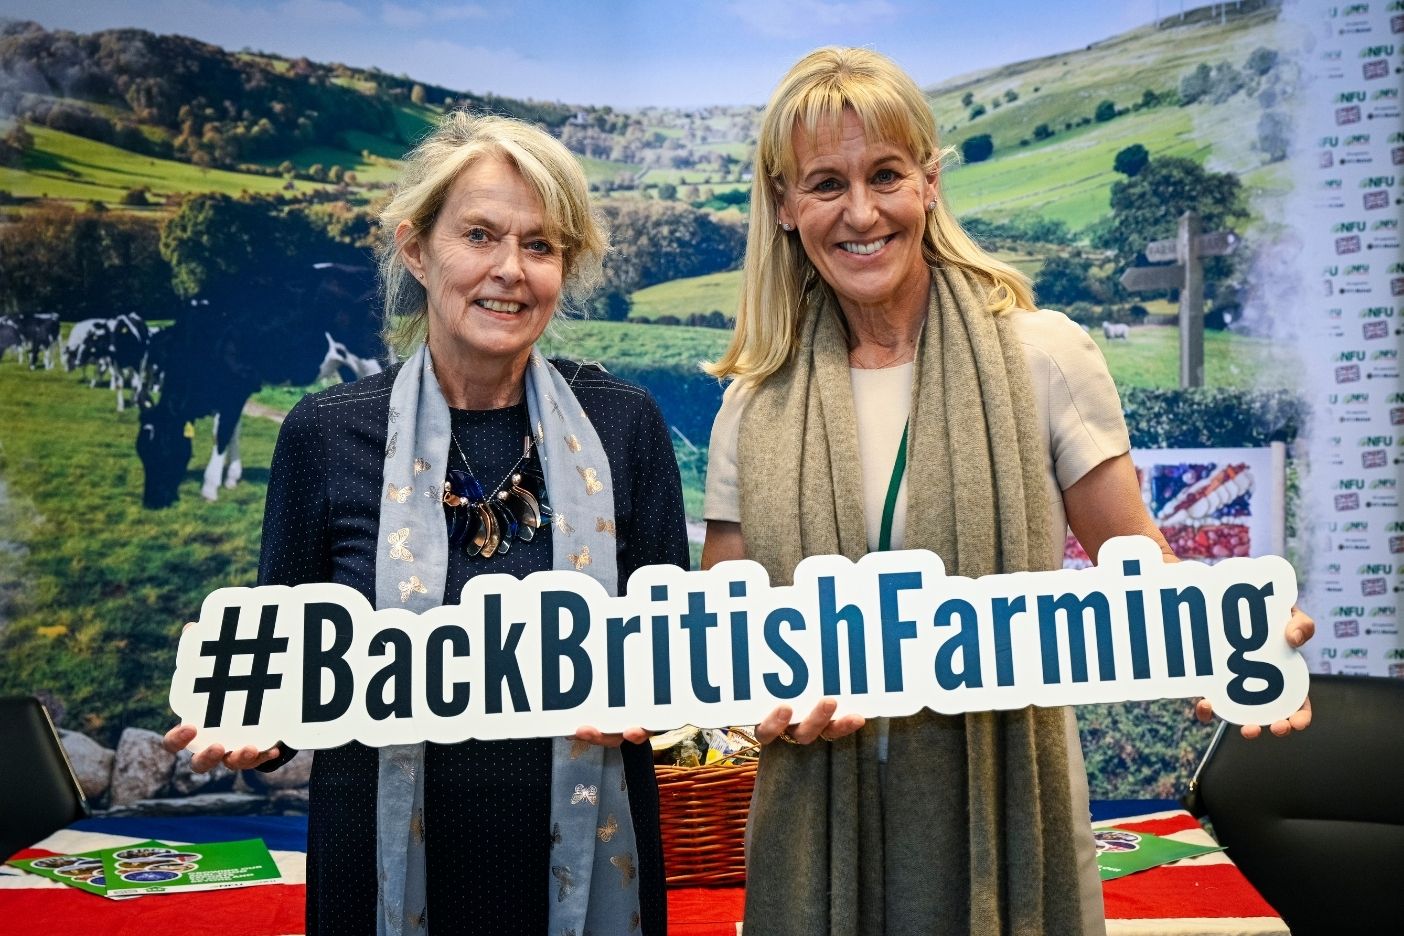 Baroness McIntosh and Minette Batters backing British farming.